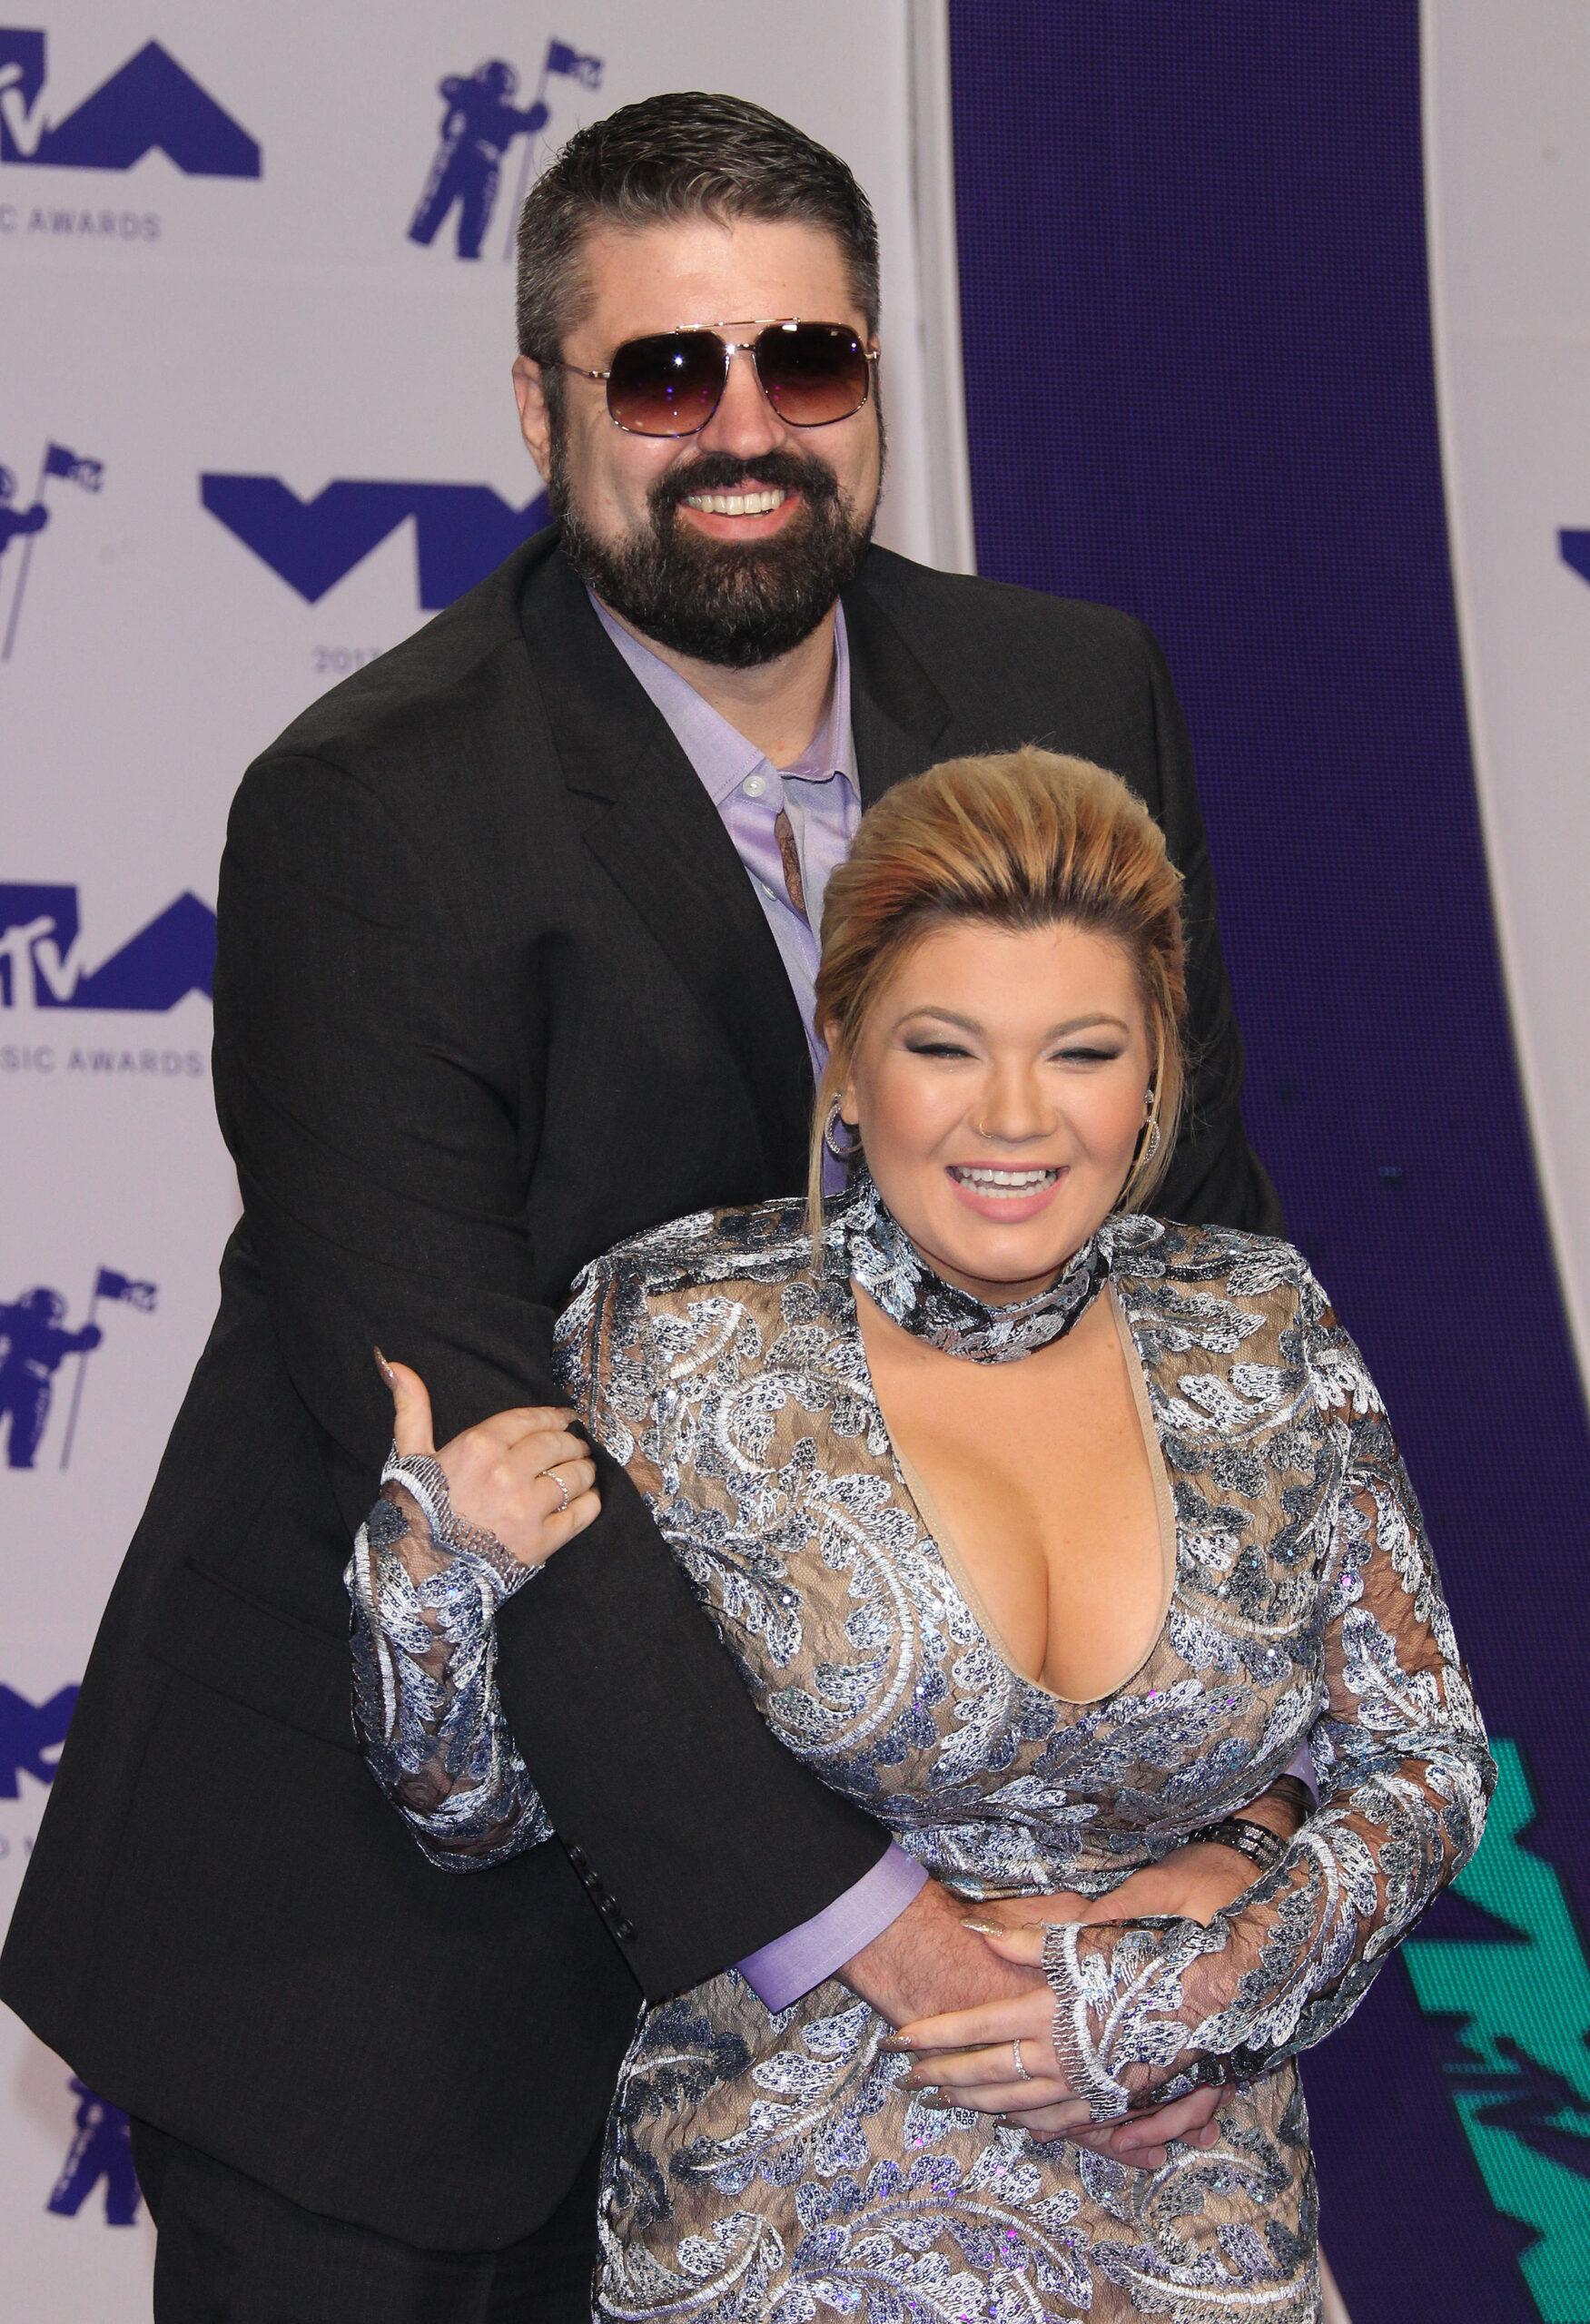 Amber Portwood and Andrew Glennon pose on the red carpet at the 2017 MTV VMA Awards